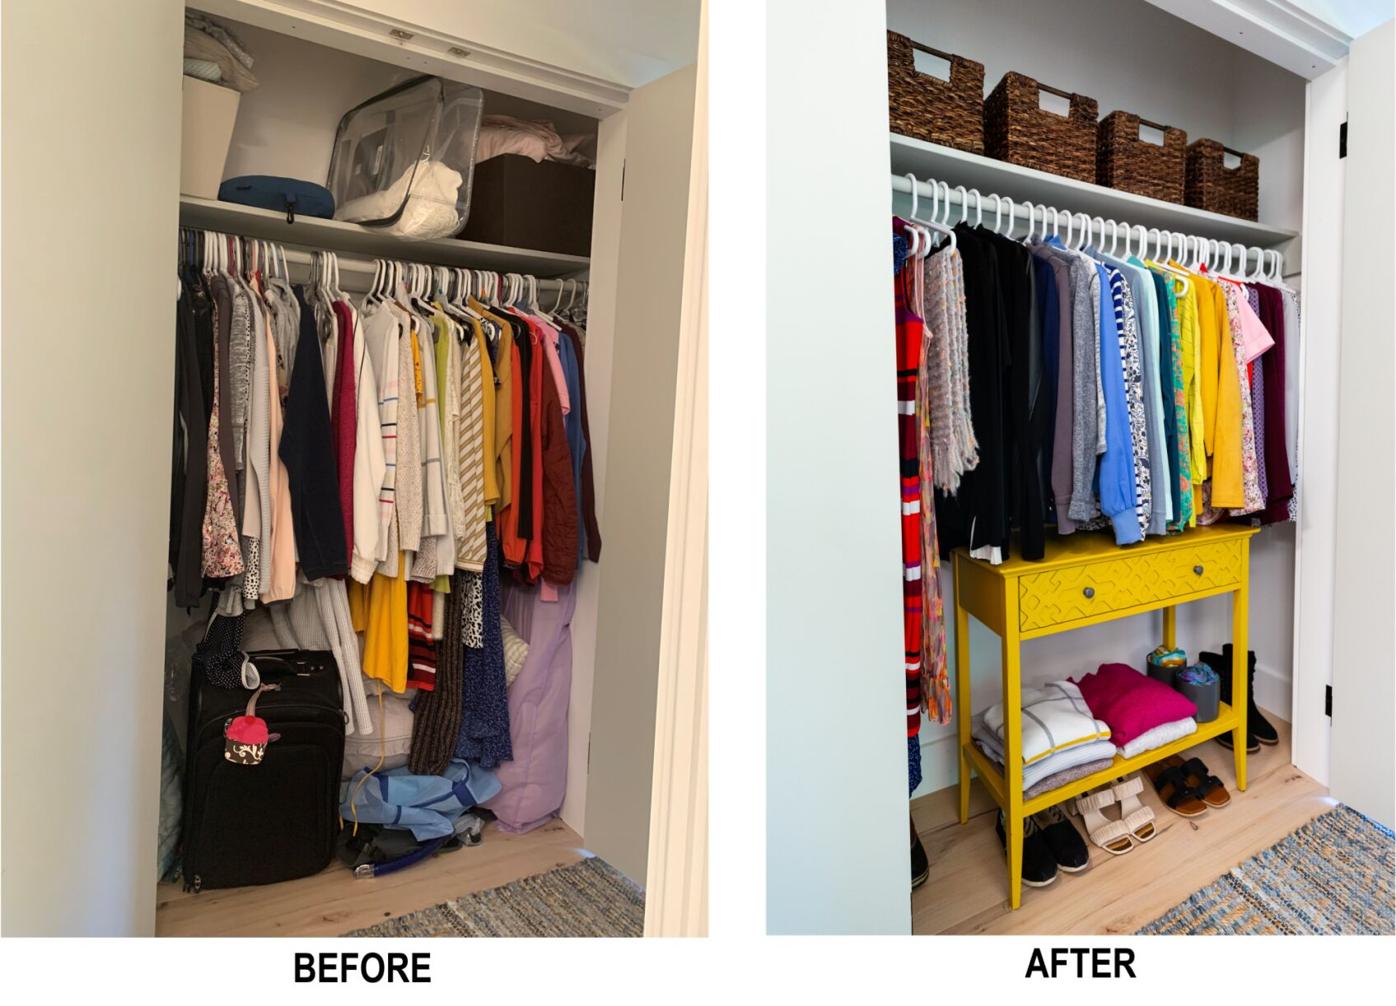 So satisfying getting my chaotic closet organized after it has been a